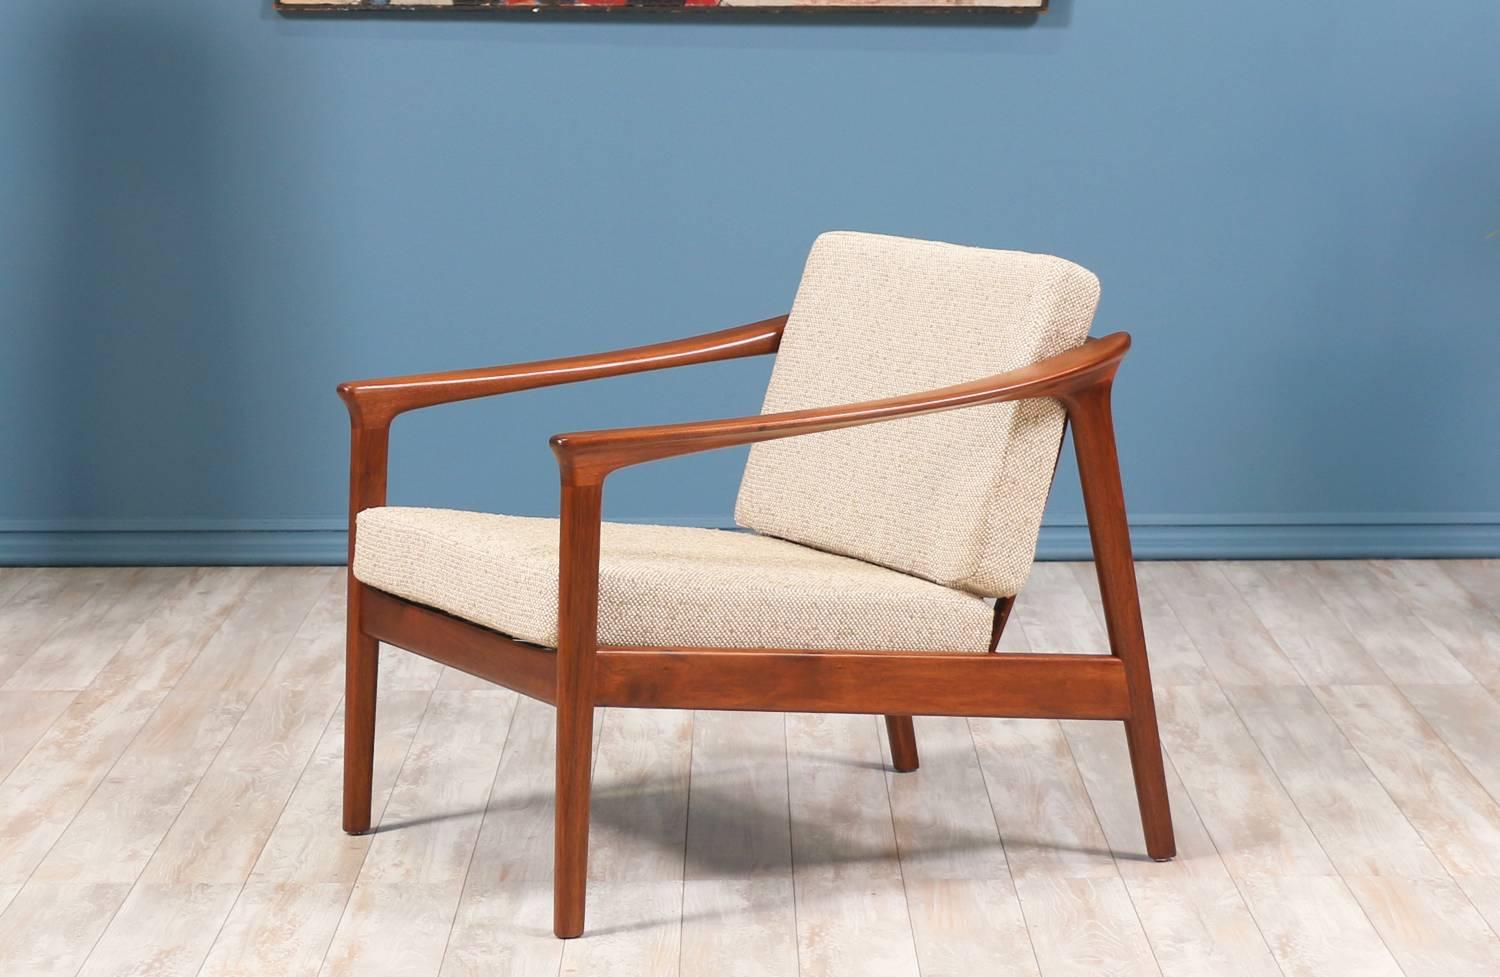 Model 1073-C Lounge Chair designed by Folke Ohlsson for Dux of Sweden circa 1950’s. Newly refinished Scandinavian modern design, featuring a walnut wood frame with eight slats on the open back and curvilinear arm rests. The cushions are